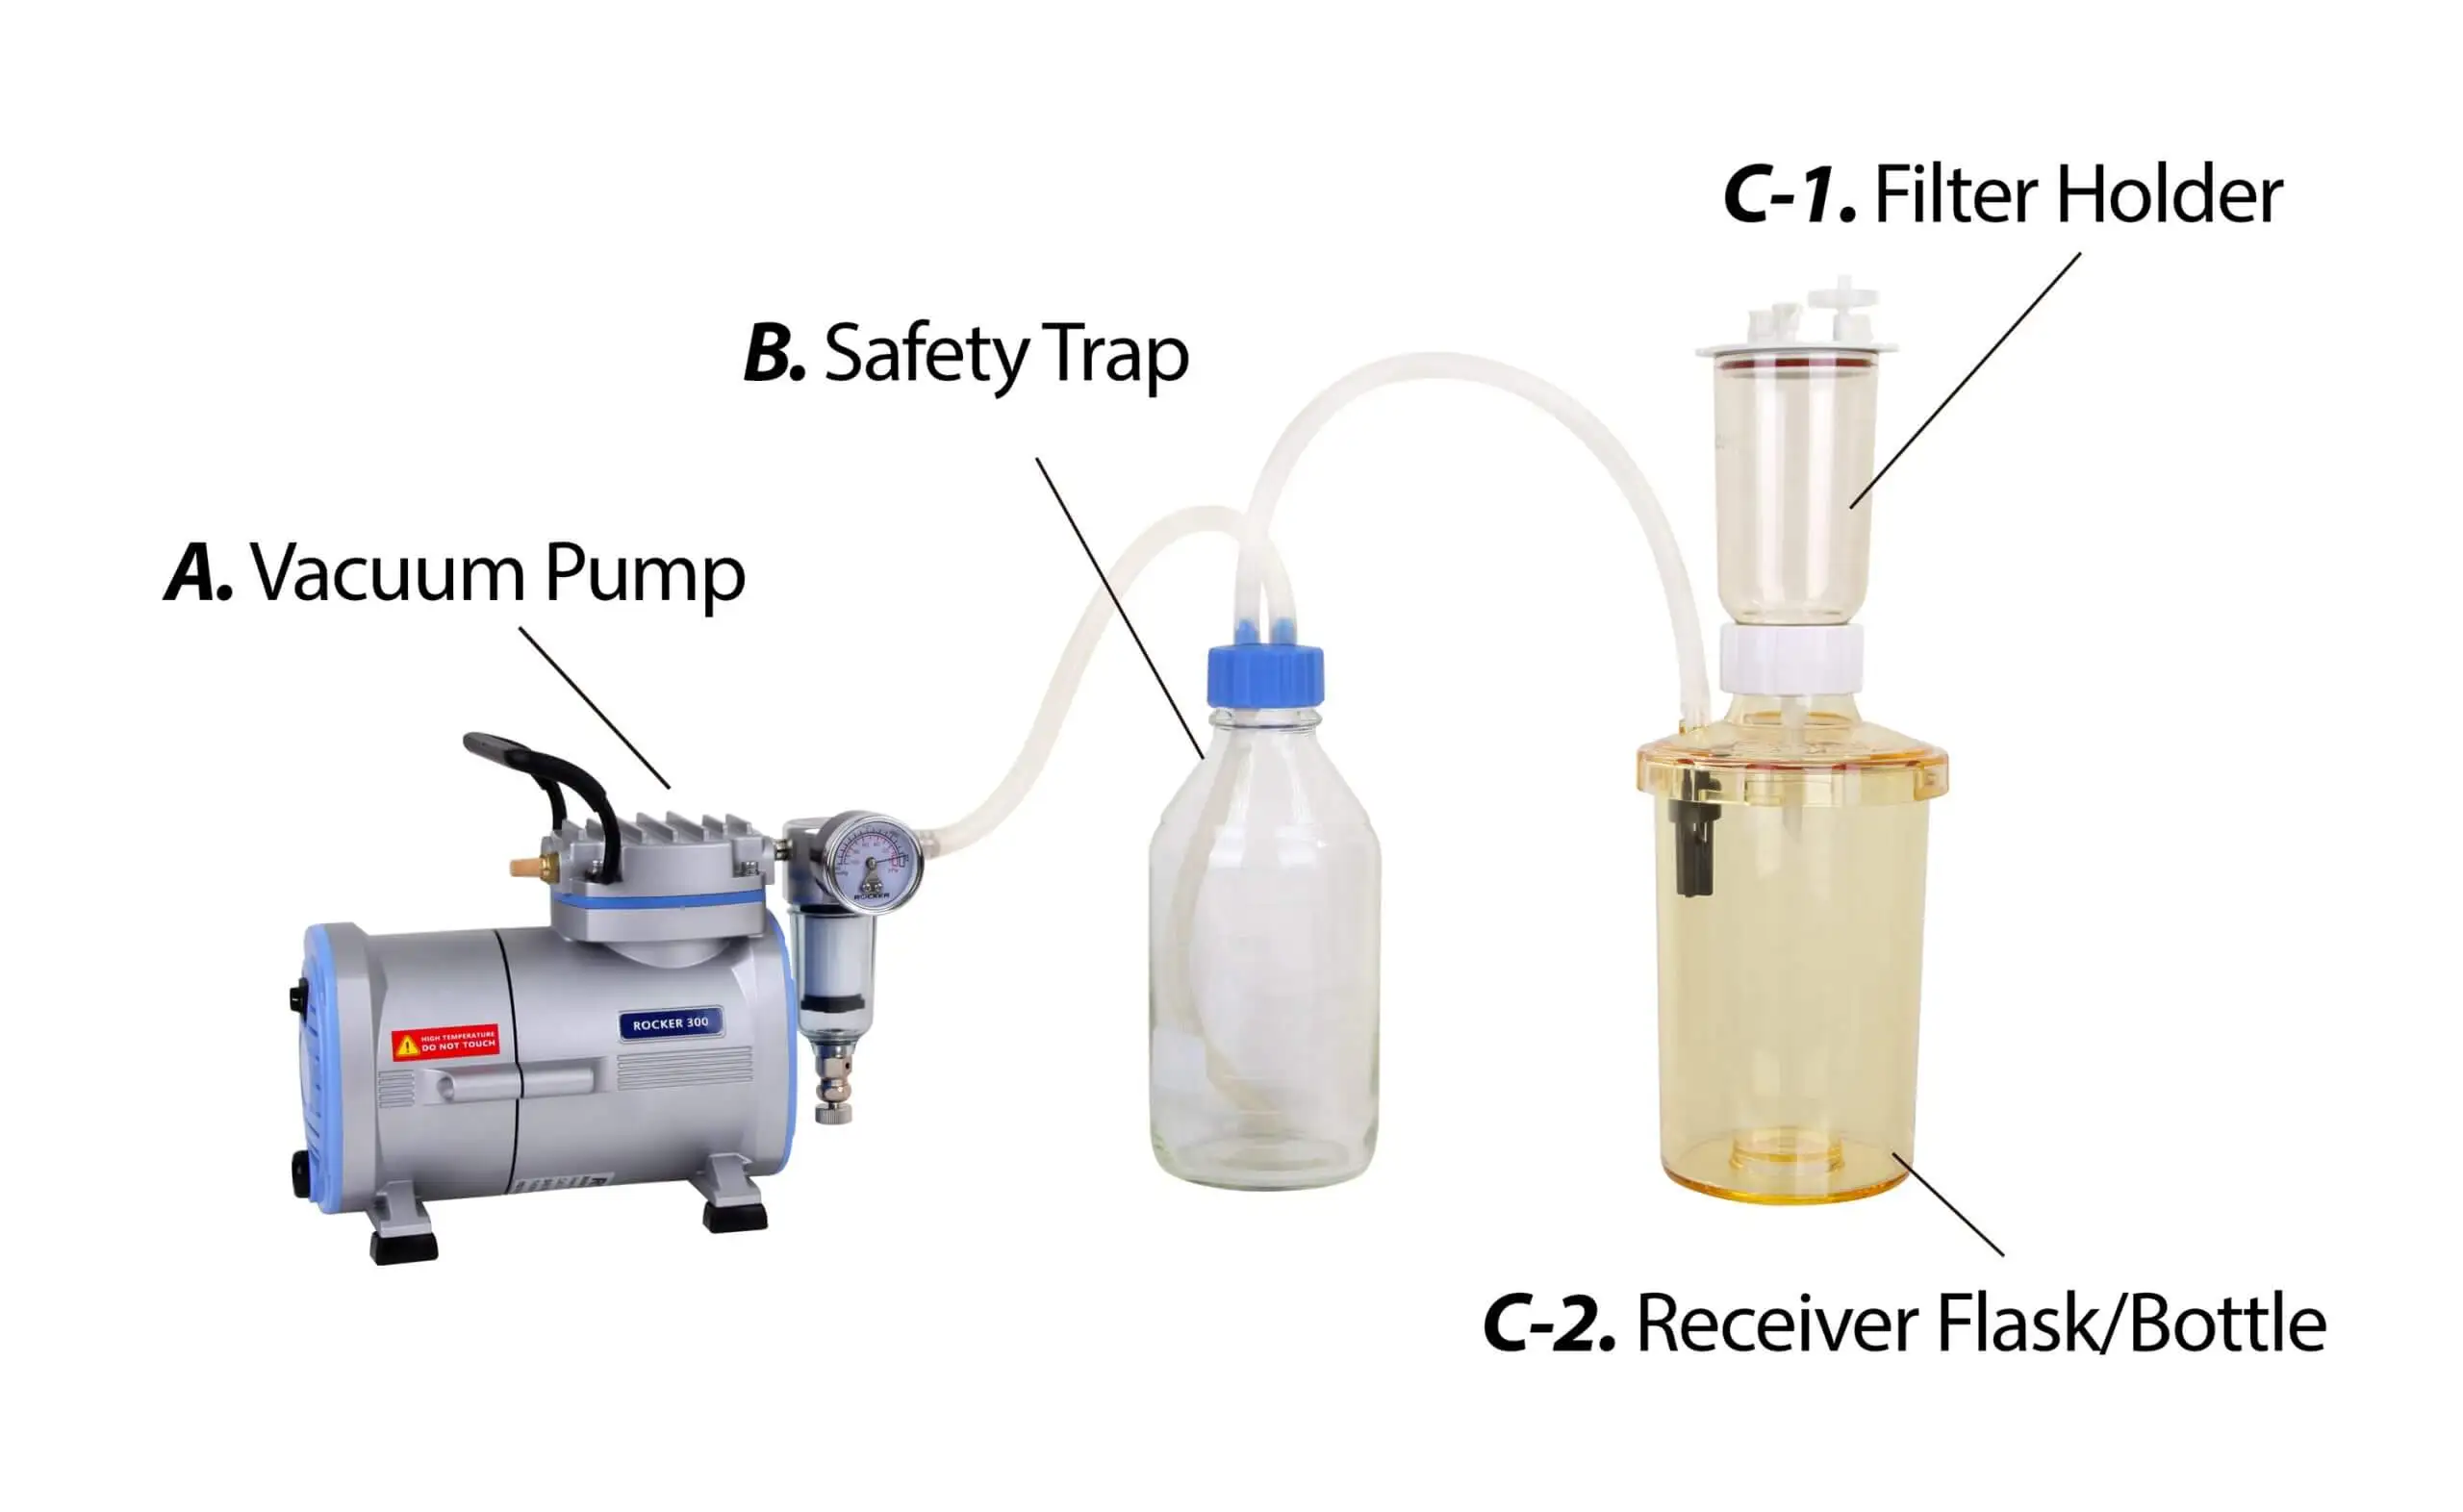 A picture of a lab vacuum pump being used for vacuum filtration